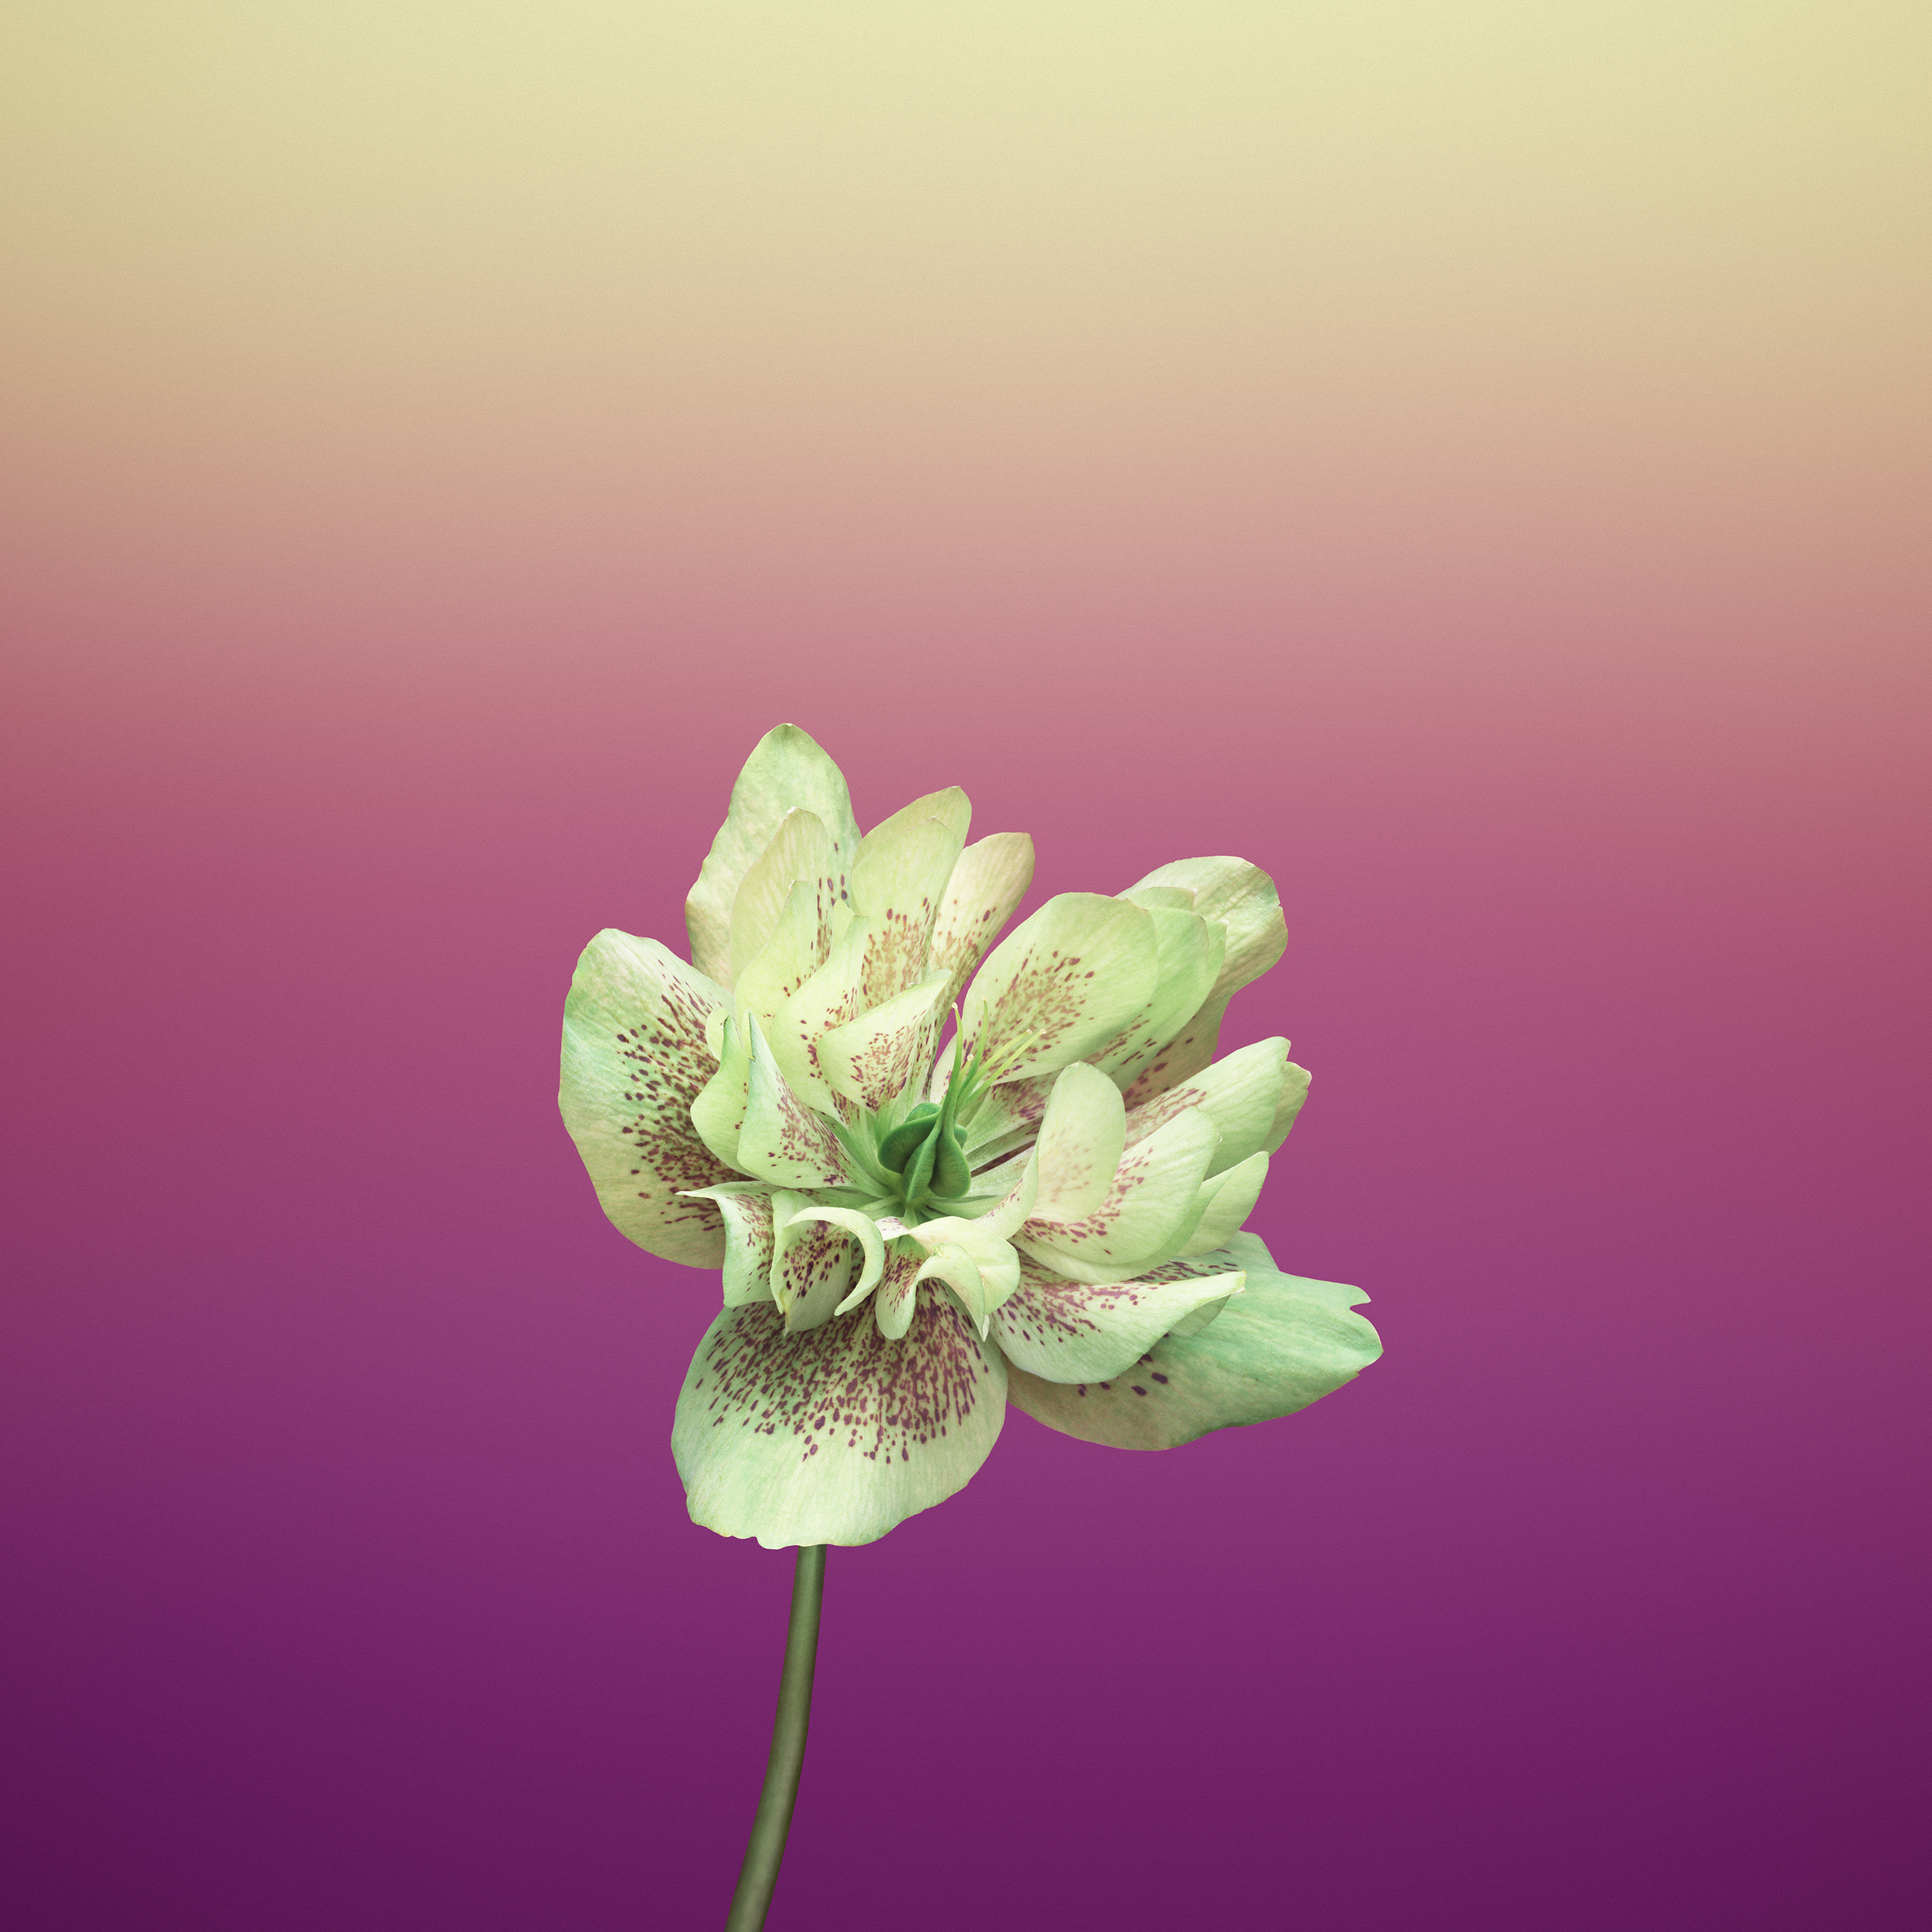 Flower Hd For Iphone Wallpapers